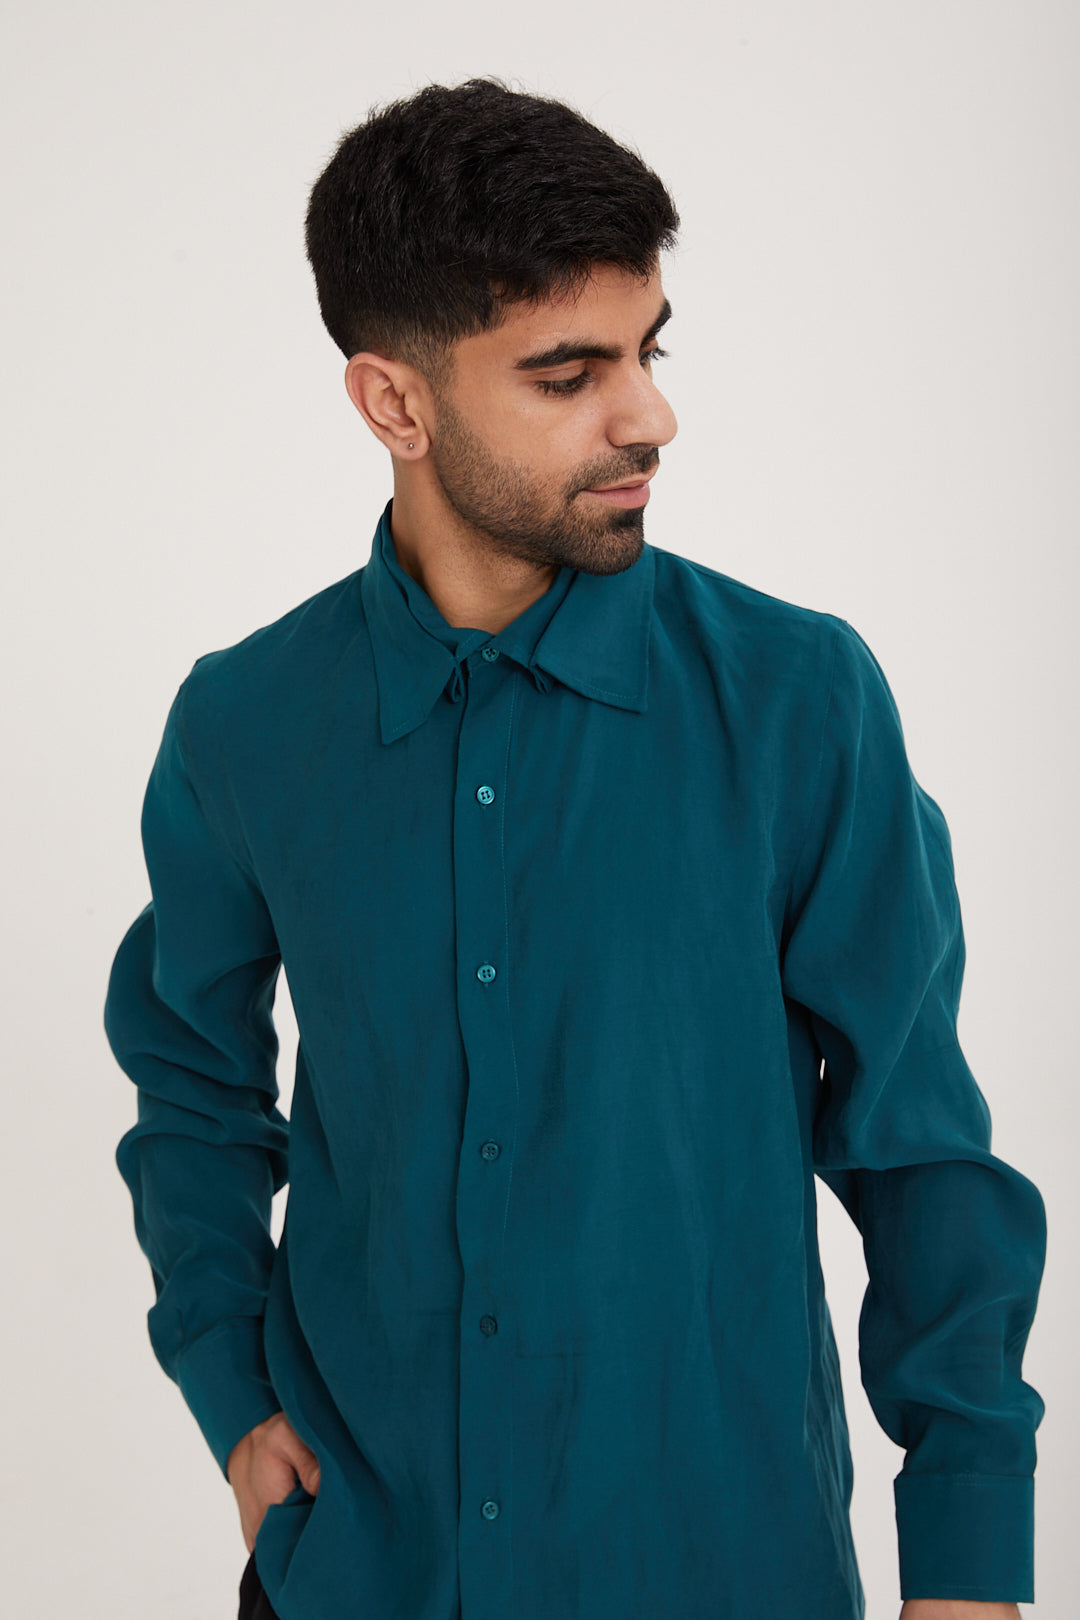 Comfy and smooth texture cotton shirt doubled collar